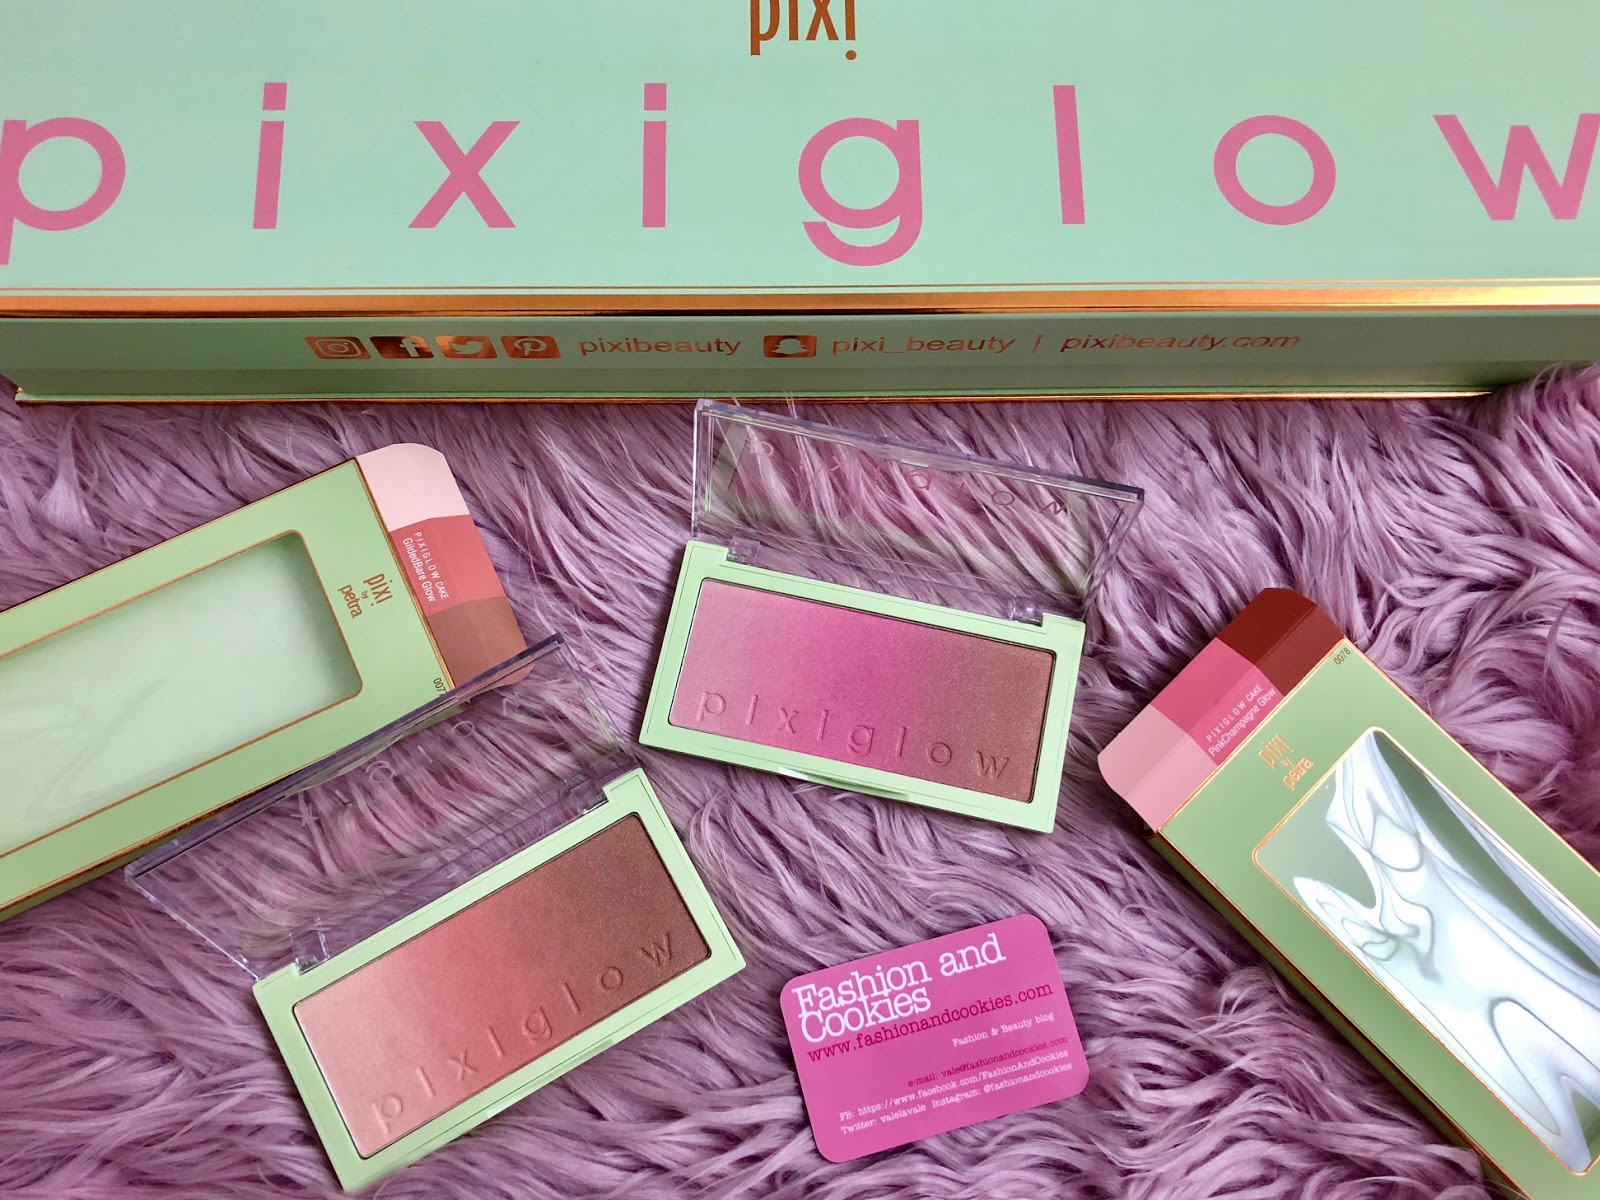 PixiGlow Cake palettes: new from Pixi Beauty for a radiant complexion on Fashion and Cookies beauty blog